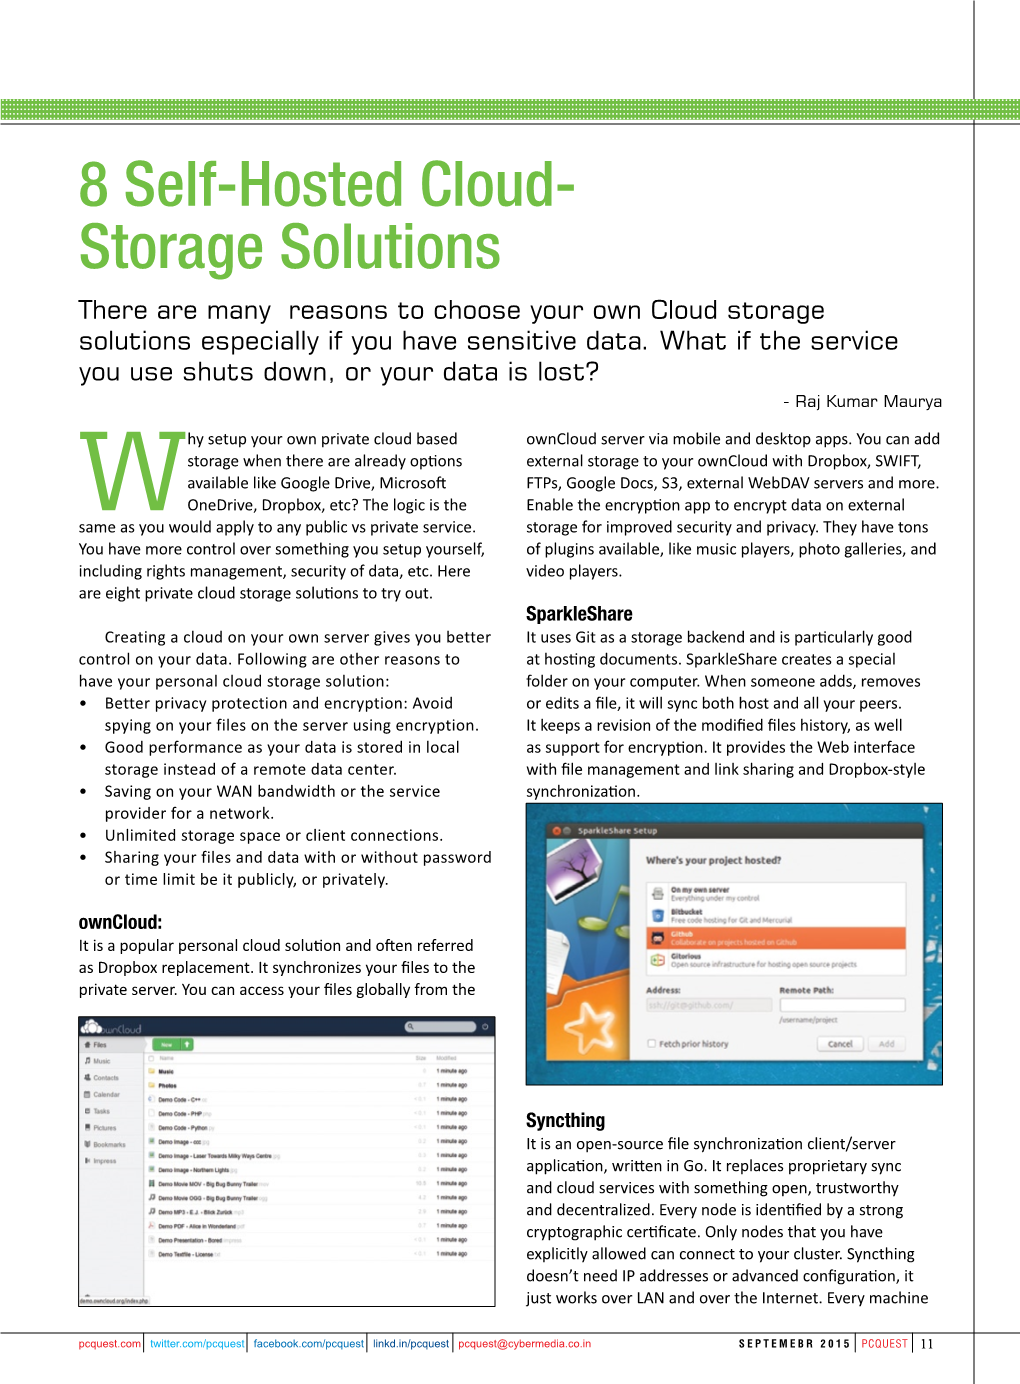 8 Self-Hosted Cloud- Storage Solutions There Are Many Reasons to Choose Your Own Cloud Storage Solutions Especially If You Have Sensitive Data